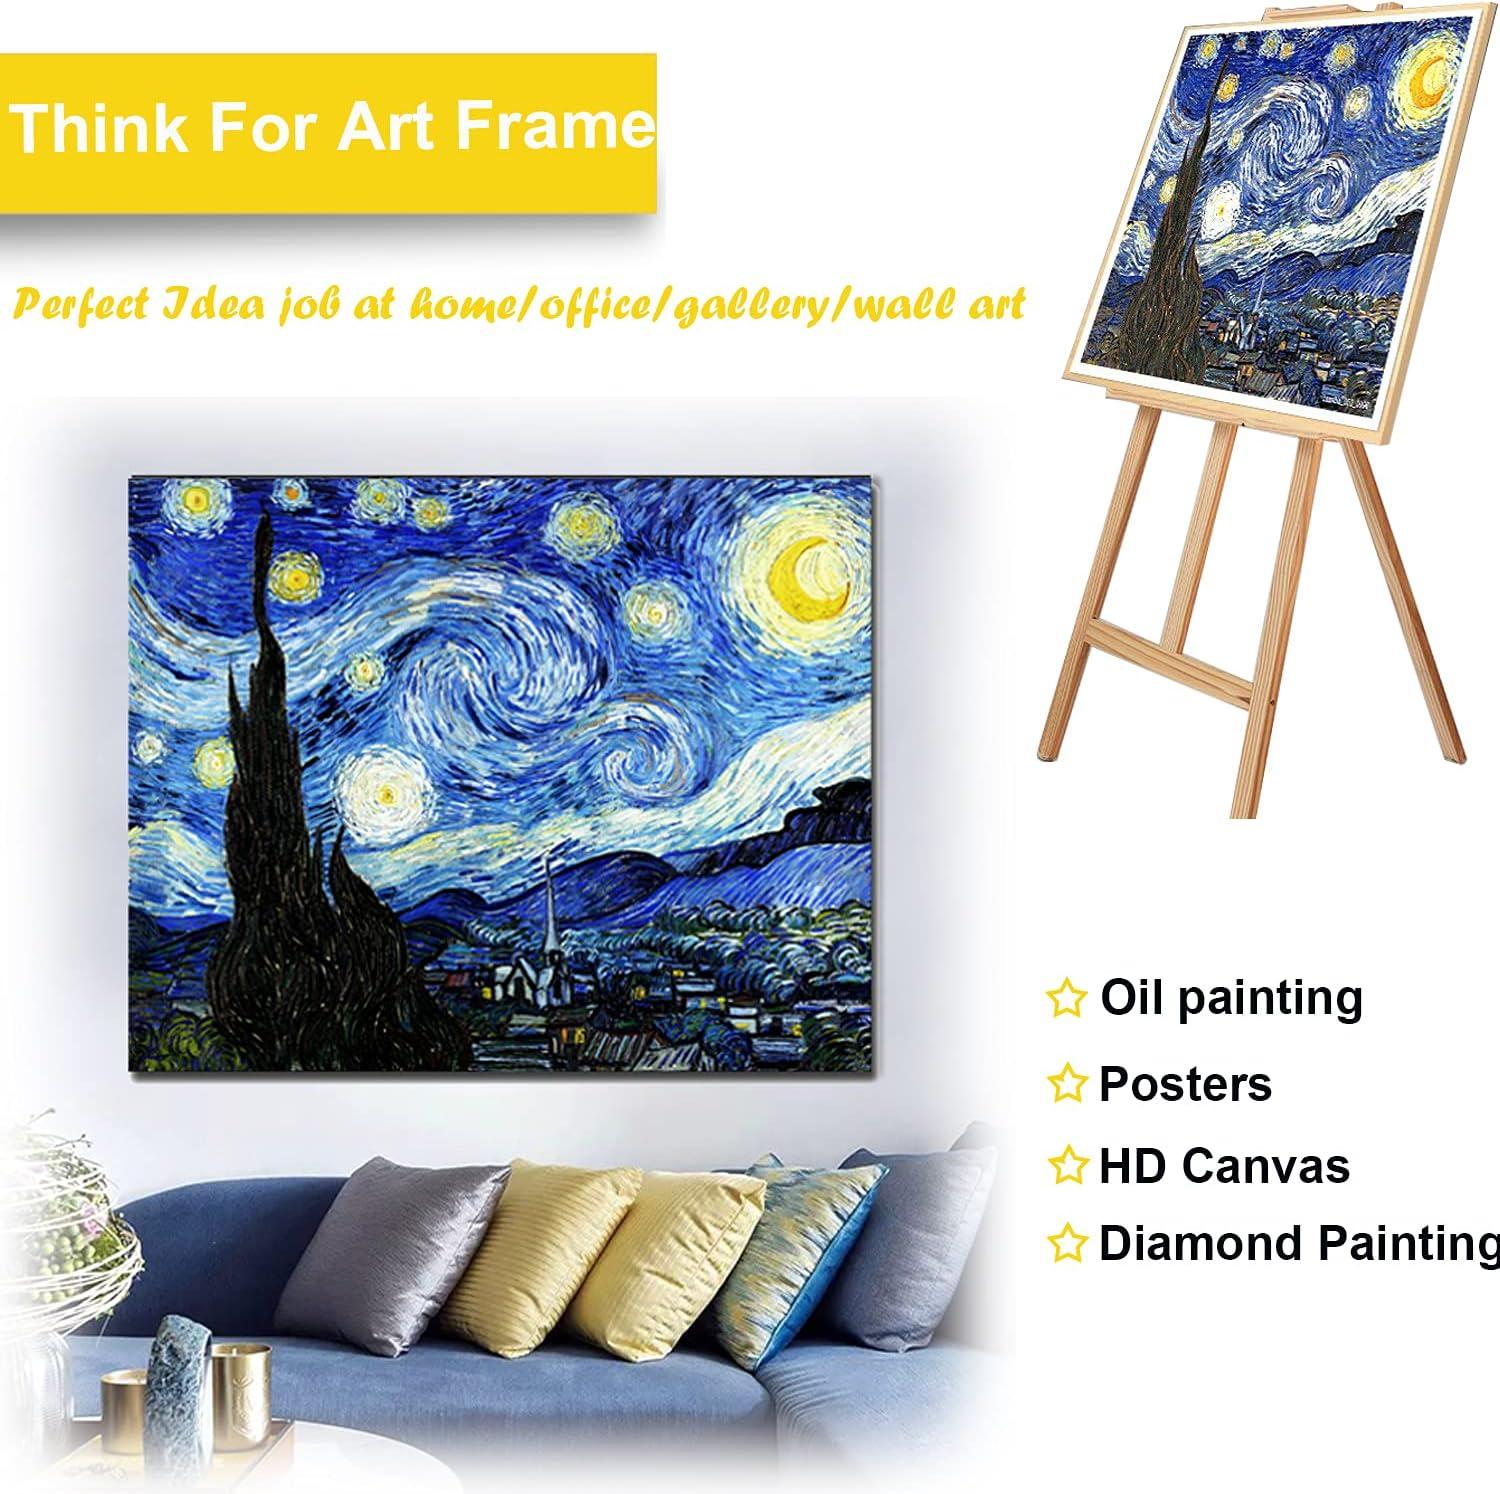  Ledg Frames For Canvas Paintings, 16x20 Canvas Stretcher  Bars, DIY Paint By Numbers and Diamond Painting Kits - Canvas Frames 16X20,  Custom Fit Edges - 1 Pack